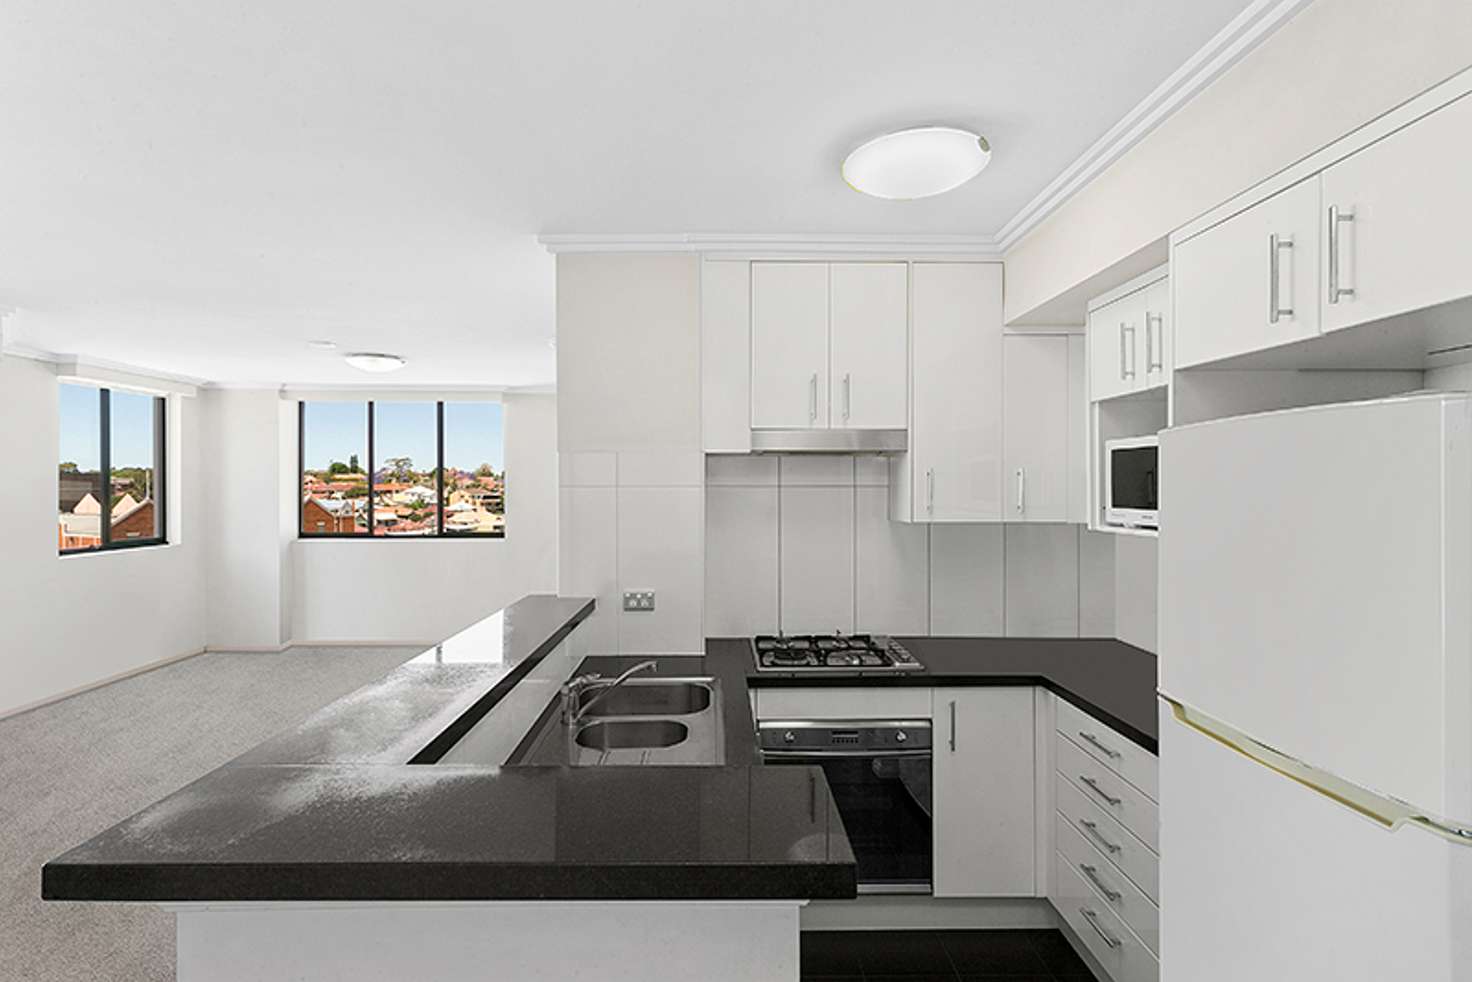 Main view of Homely apartment listing, 21/13-15 Hassall Street, Parramatta NSW 2150